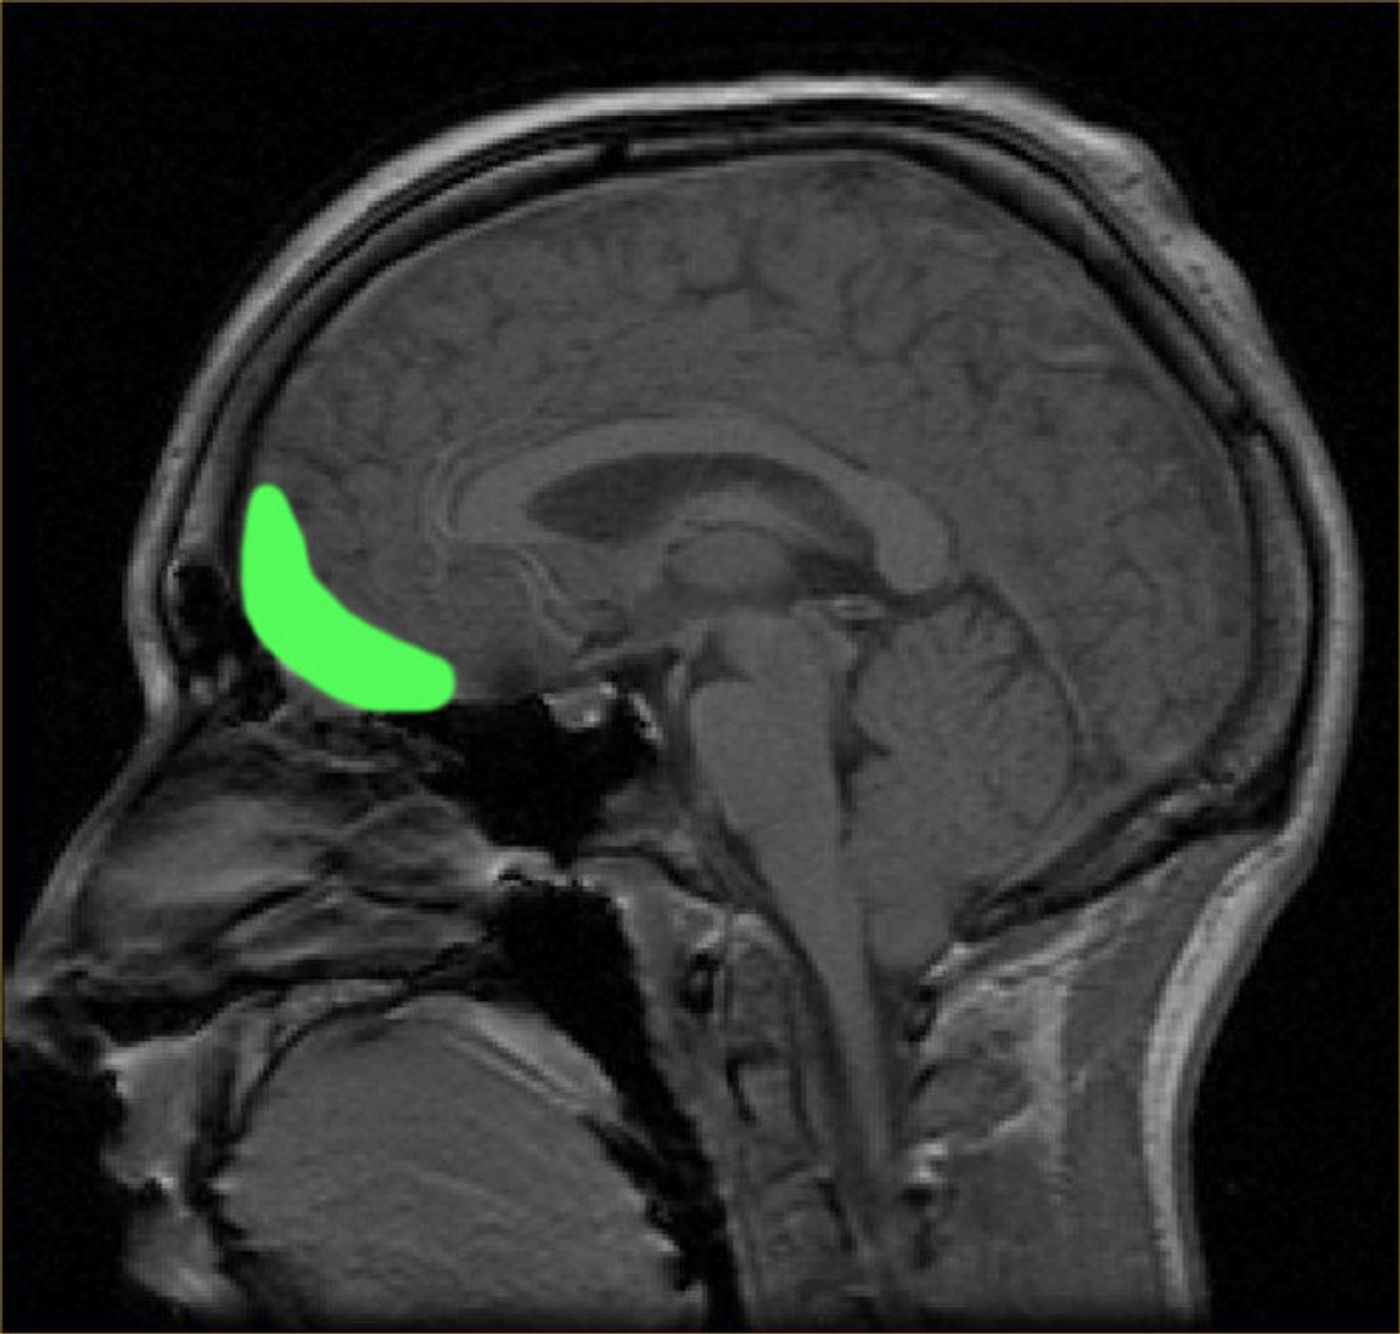 MRI image, orbitofrontal cortex is labeled in green.